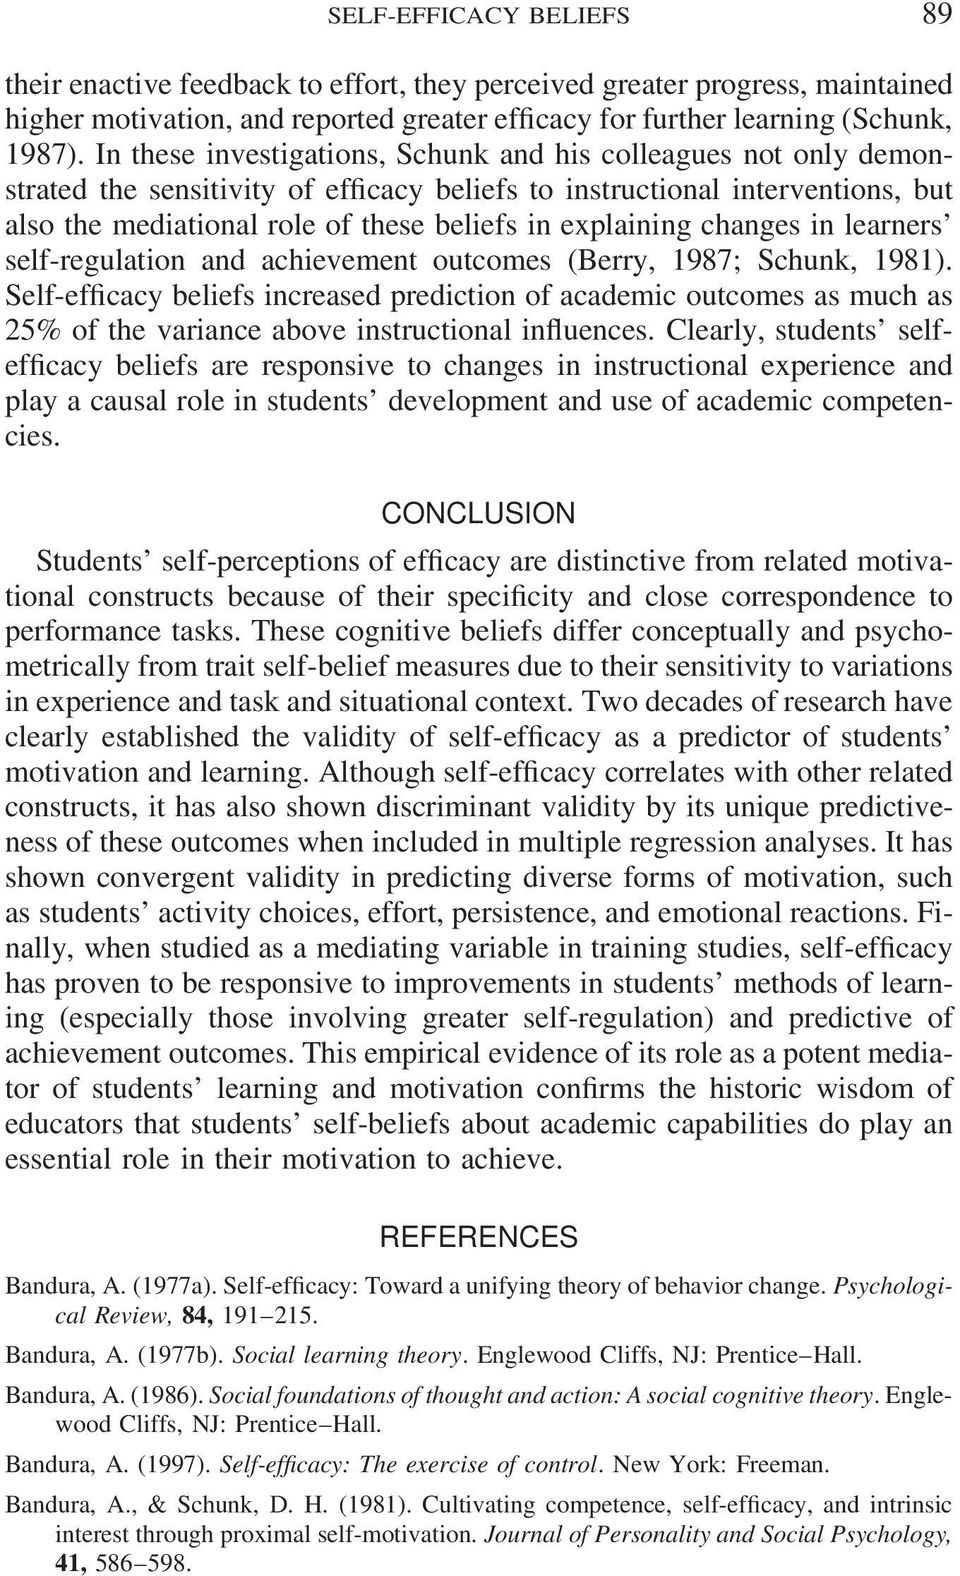 explaining changes in learners self-regulation and achievement outcomes (Berry, 1987; Schunk, 1981).